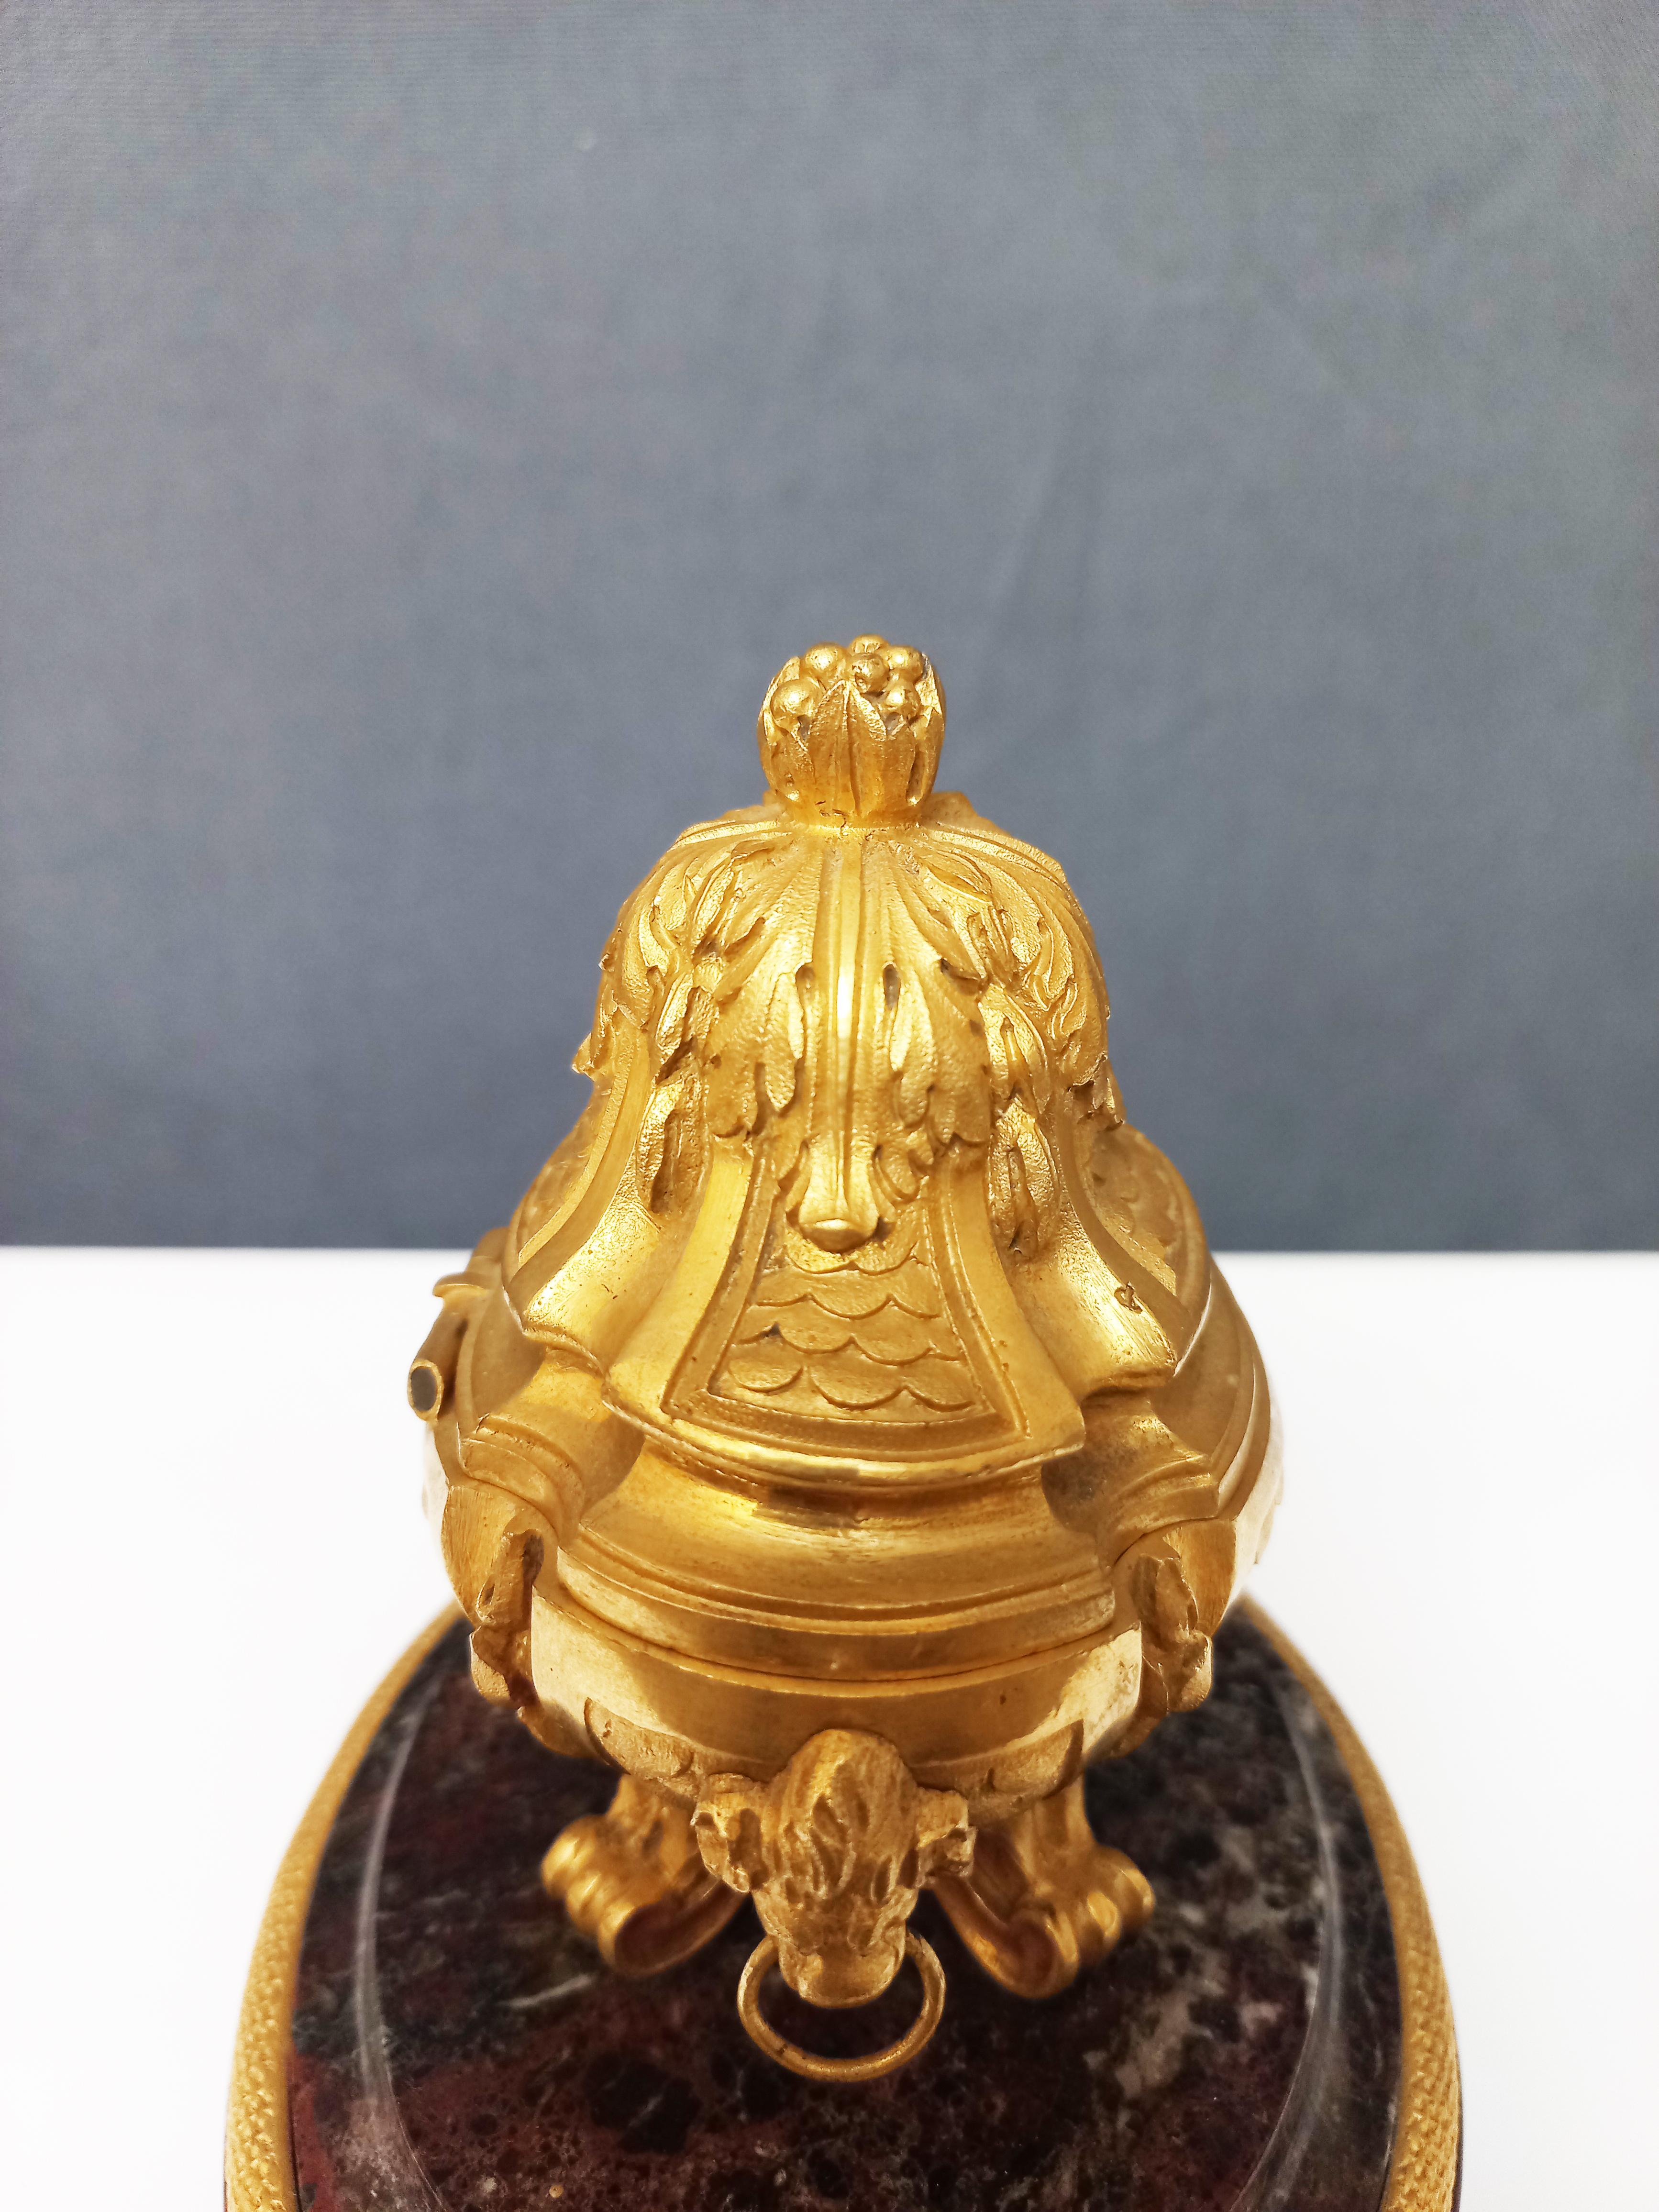 Richly chiseled and gilded bronze inkwell.
Basin with lion's mouth, arched feet with scrolls and acanthus leaves, resting on an oval marble base rimmed with bronze.
19th century period.
Very good state.